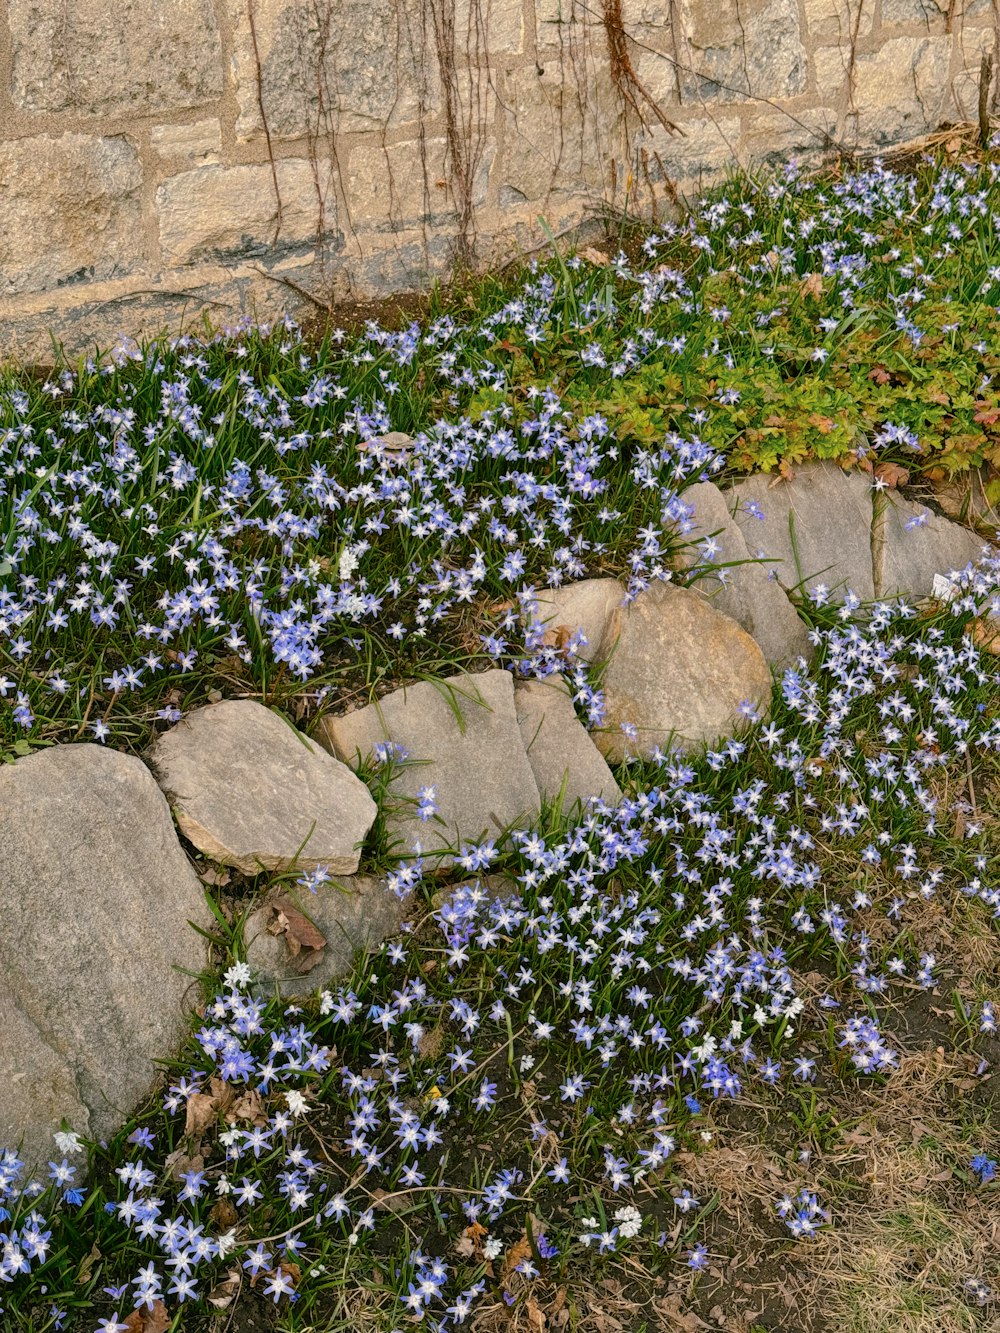 blue flowers growing on the ground next to a stone wall